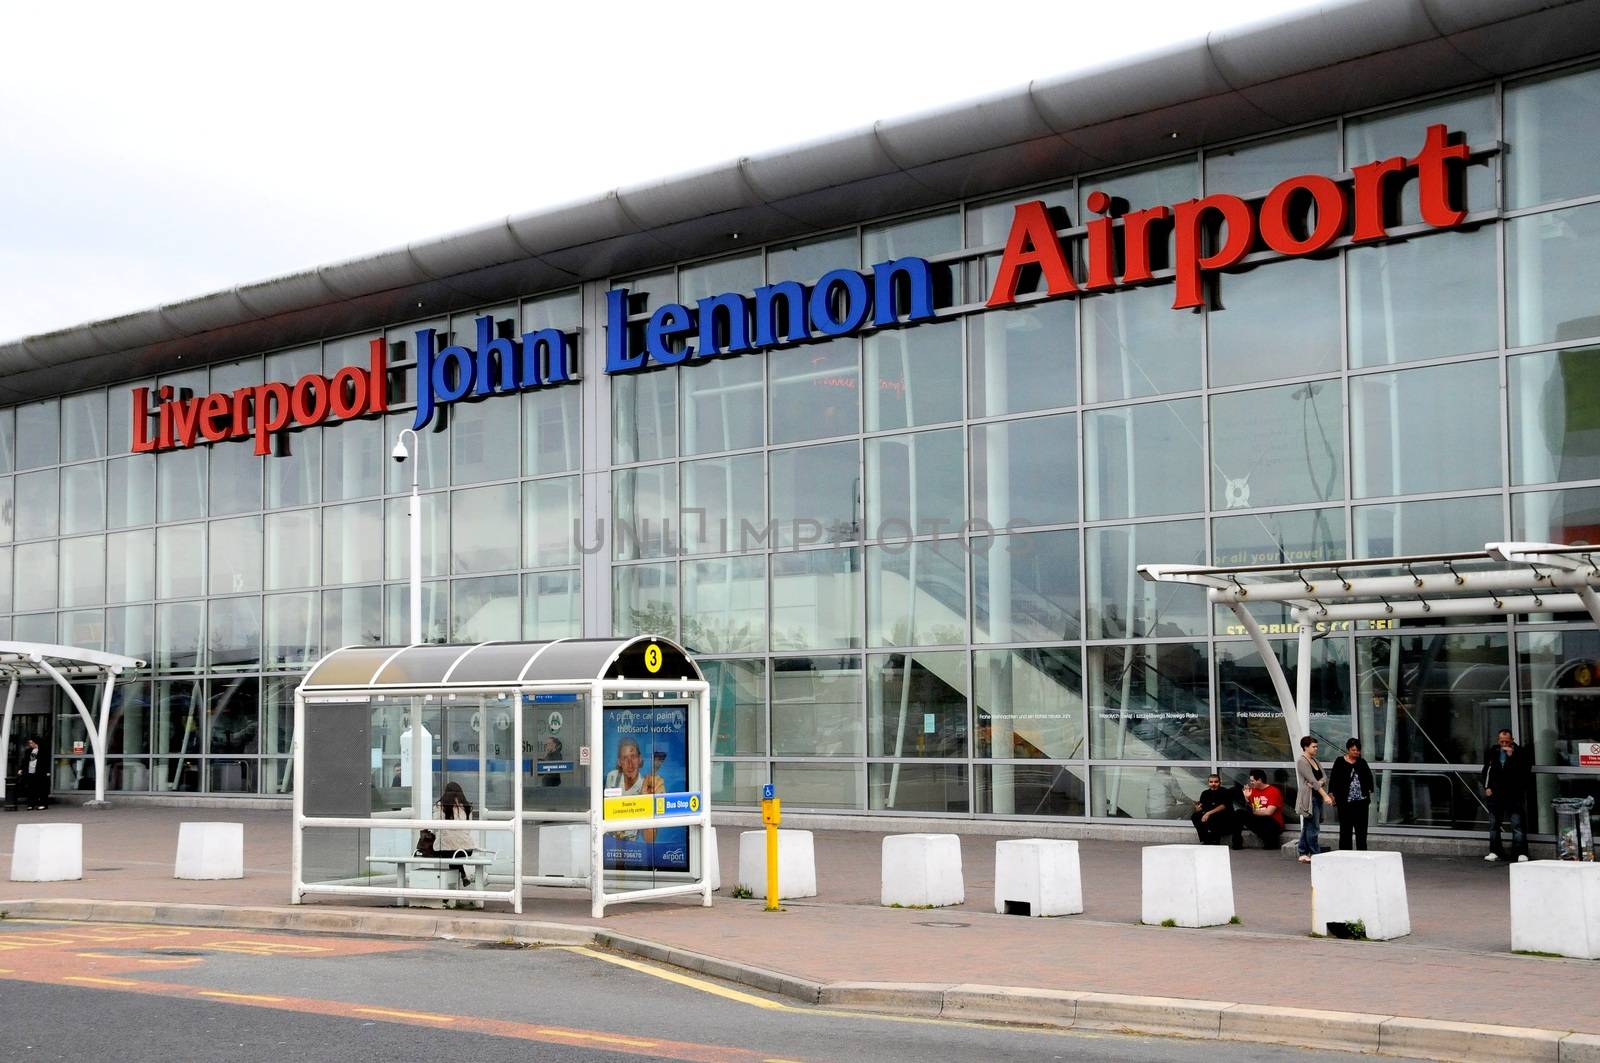 Liverpool city airport, by gorilla